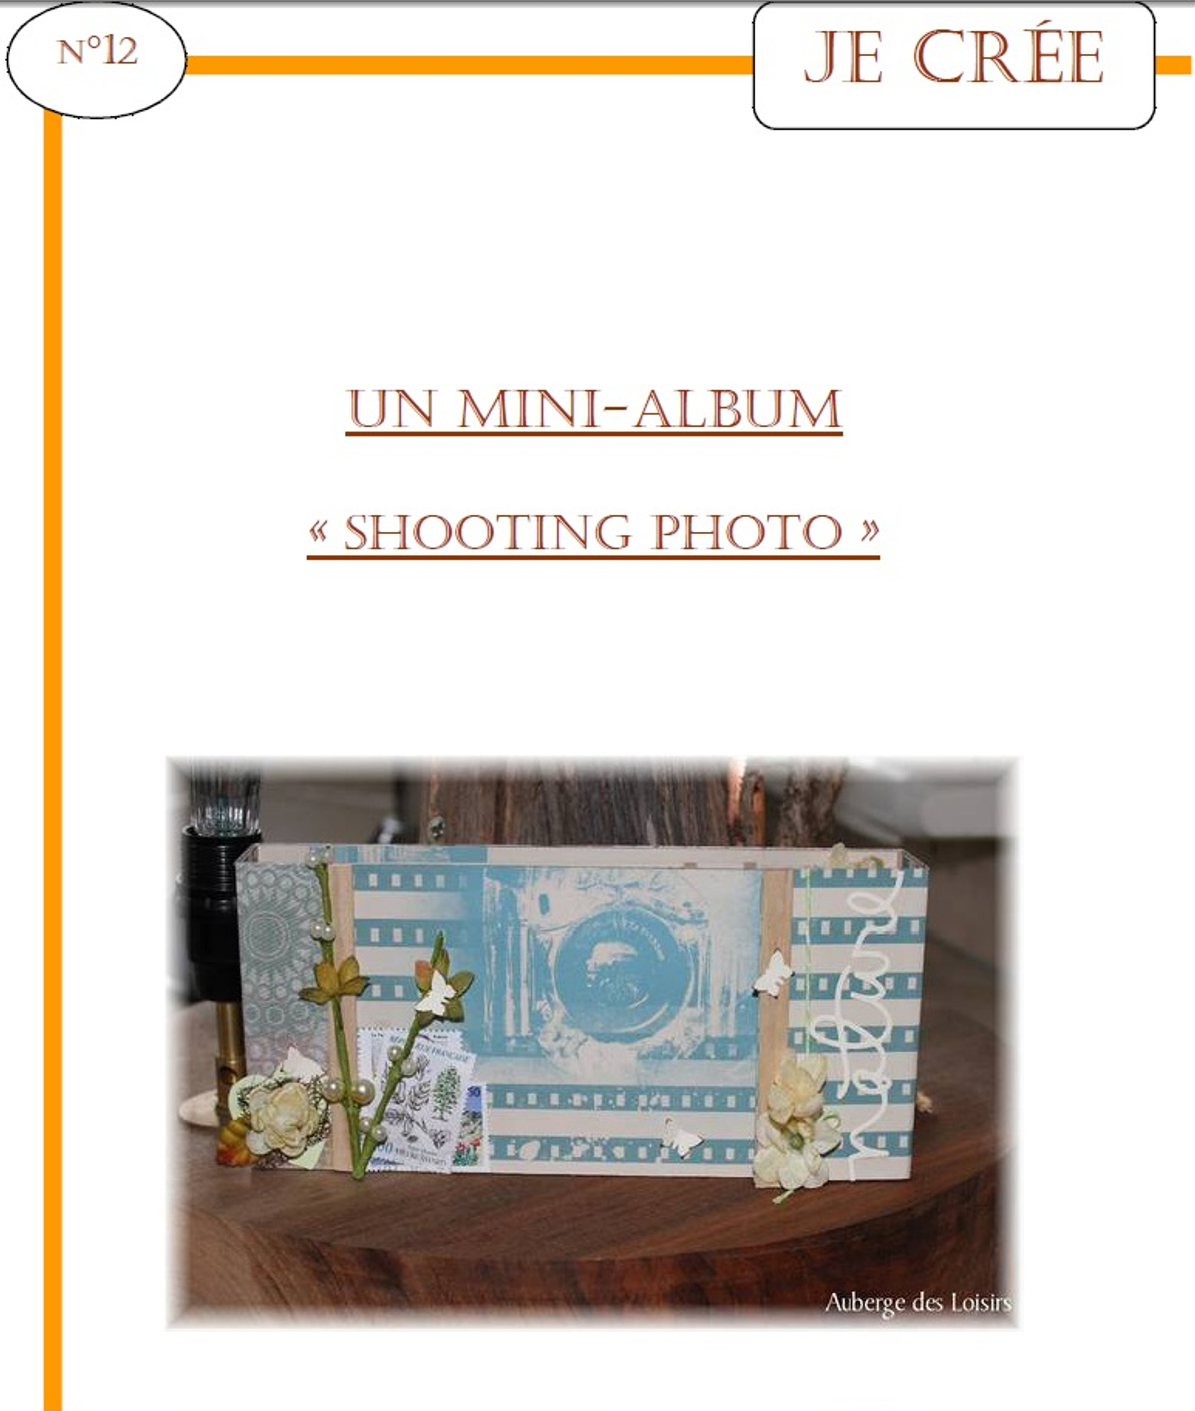 http://www.aubergedesloisirs.com/fiches-creatives/1041-fiche-je-cree-n12-mini-album-shooting-photo.html